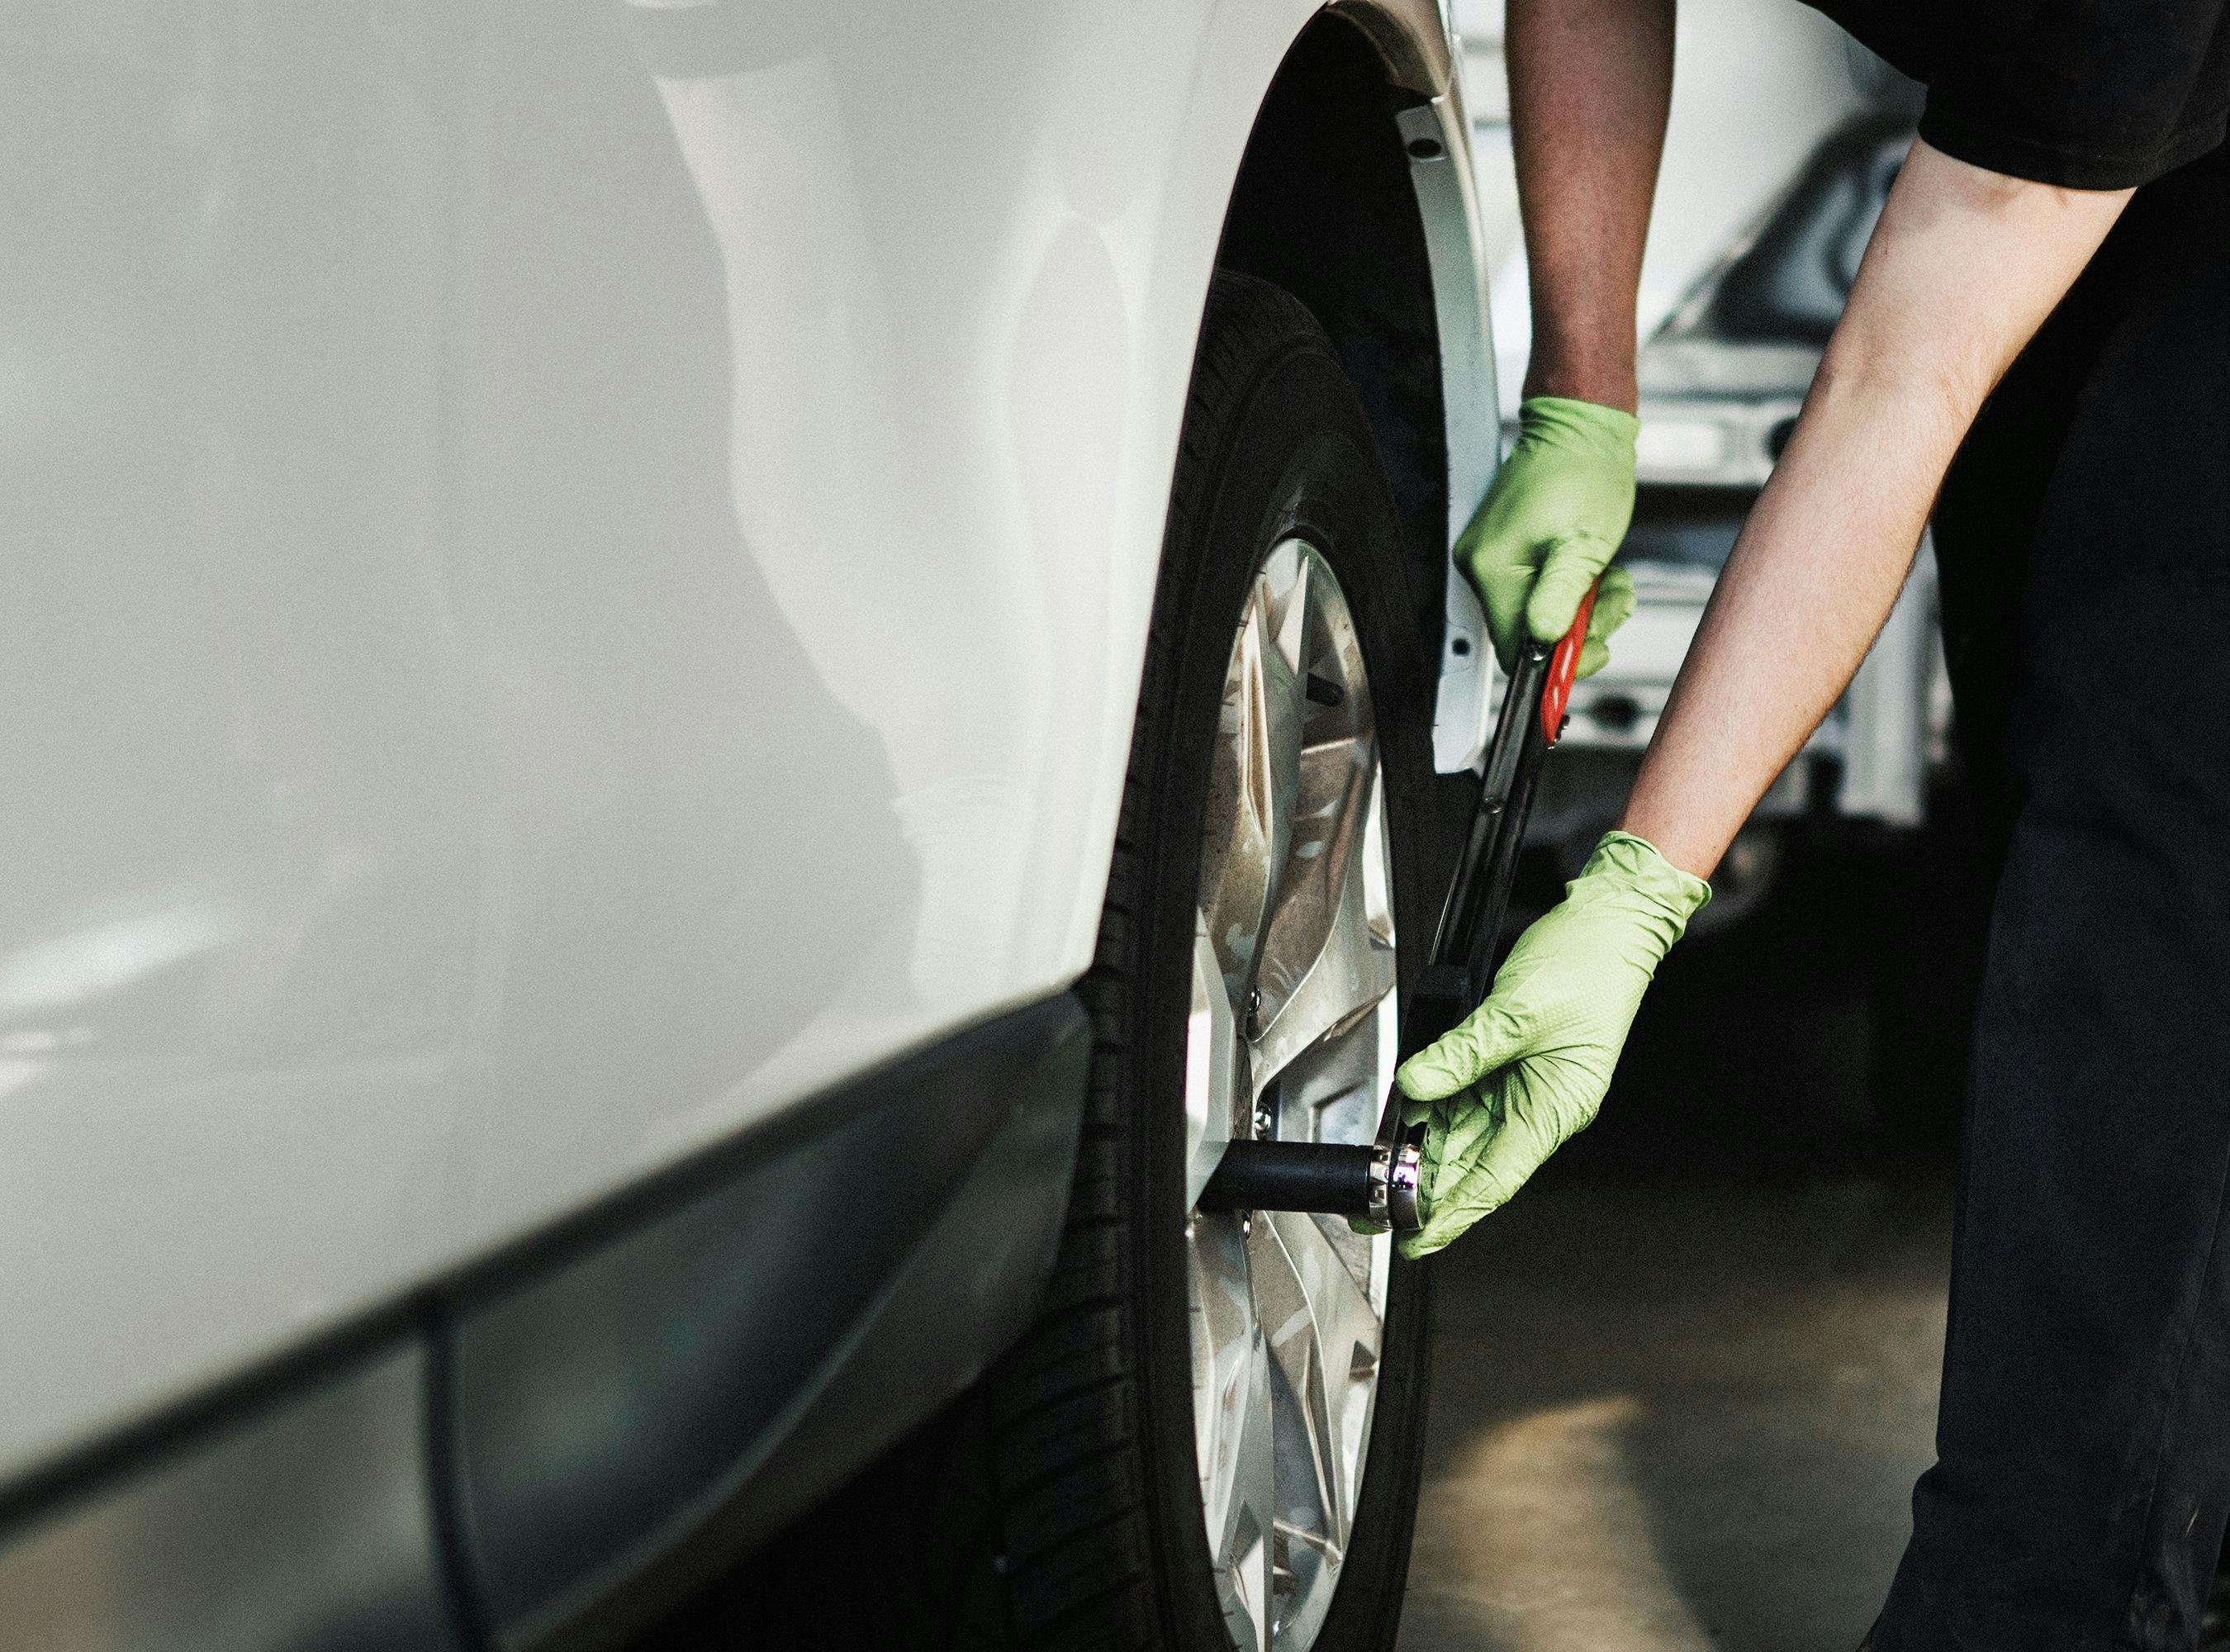 Choose Your Automotive Expert Carefully: Commercial Vehicle Operators Cannot Discuss Auto Repairs